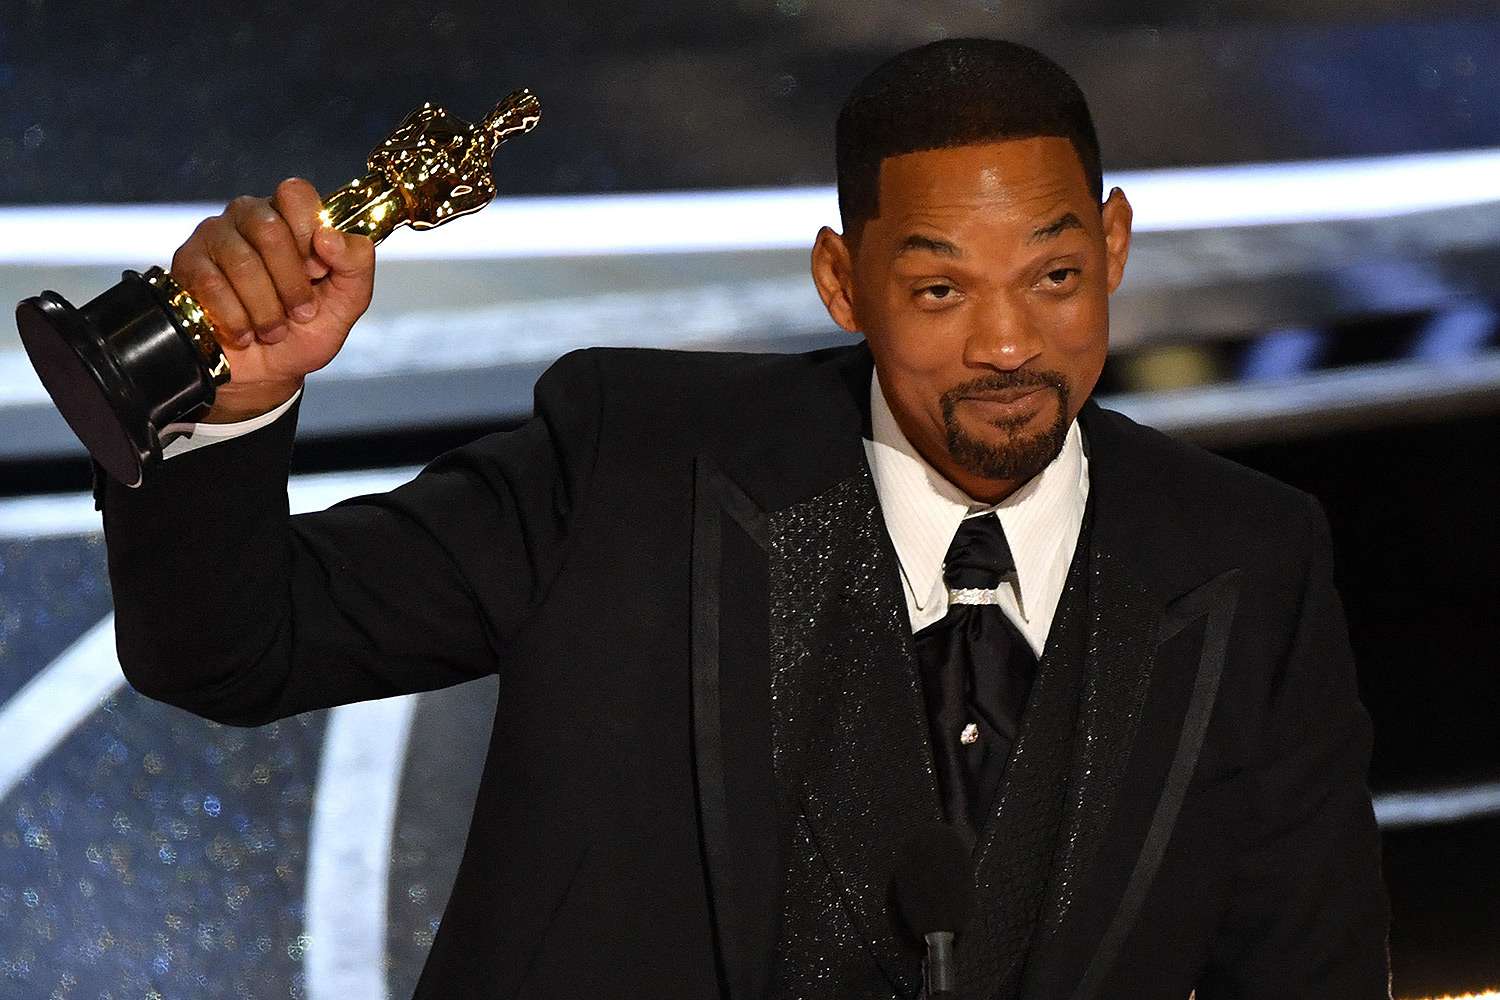 Chris Rock Refuses Invitation To Host 2023 Oscars After Will Smith's Slap